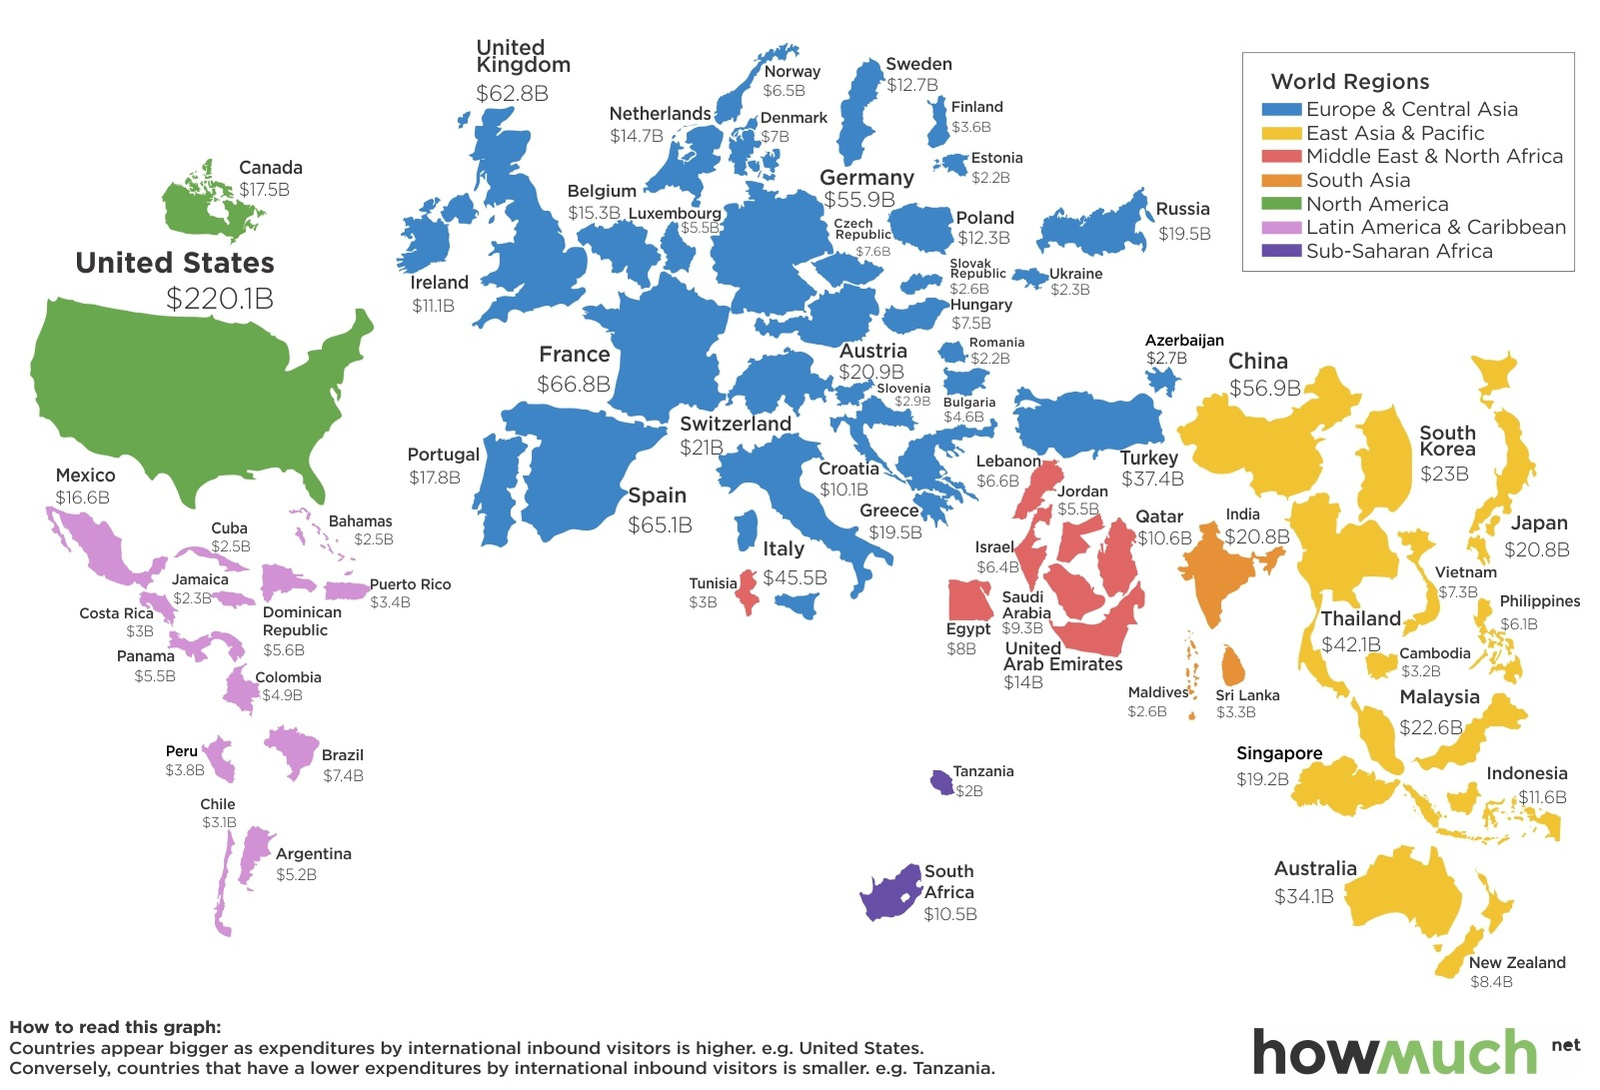 How Much Money Do Tourists Spend in Each Country?